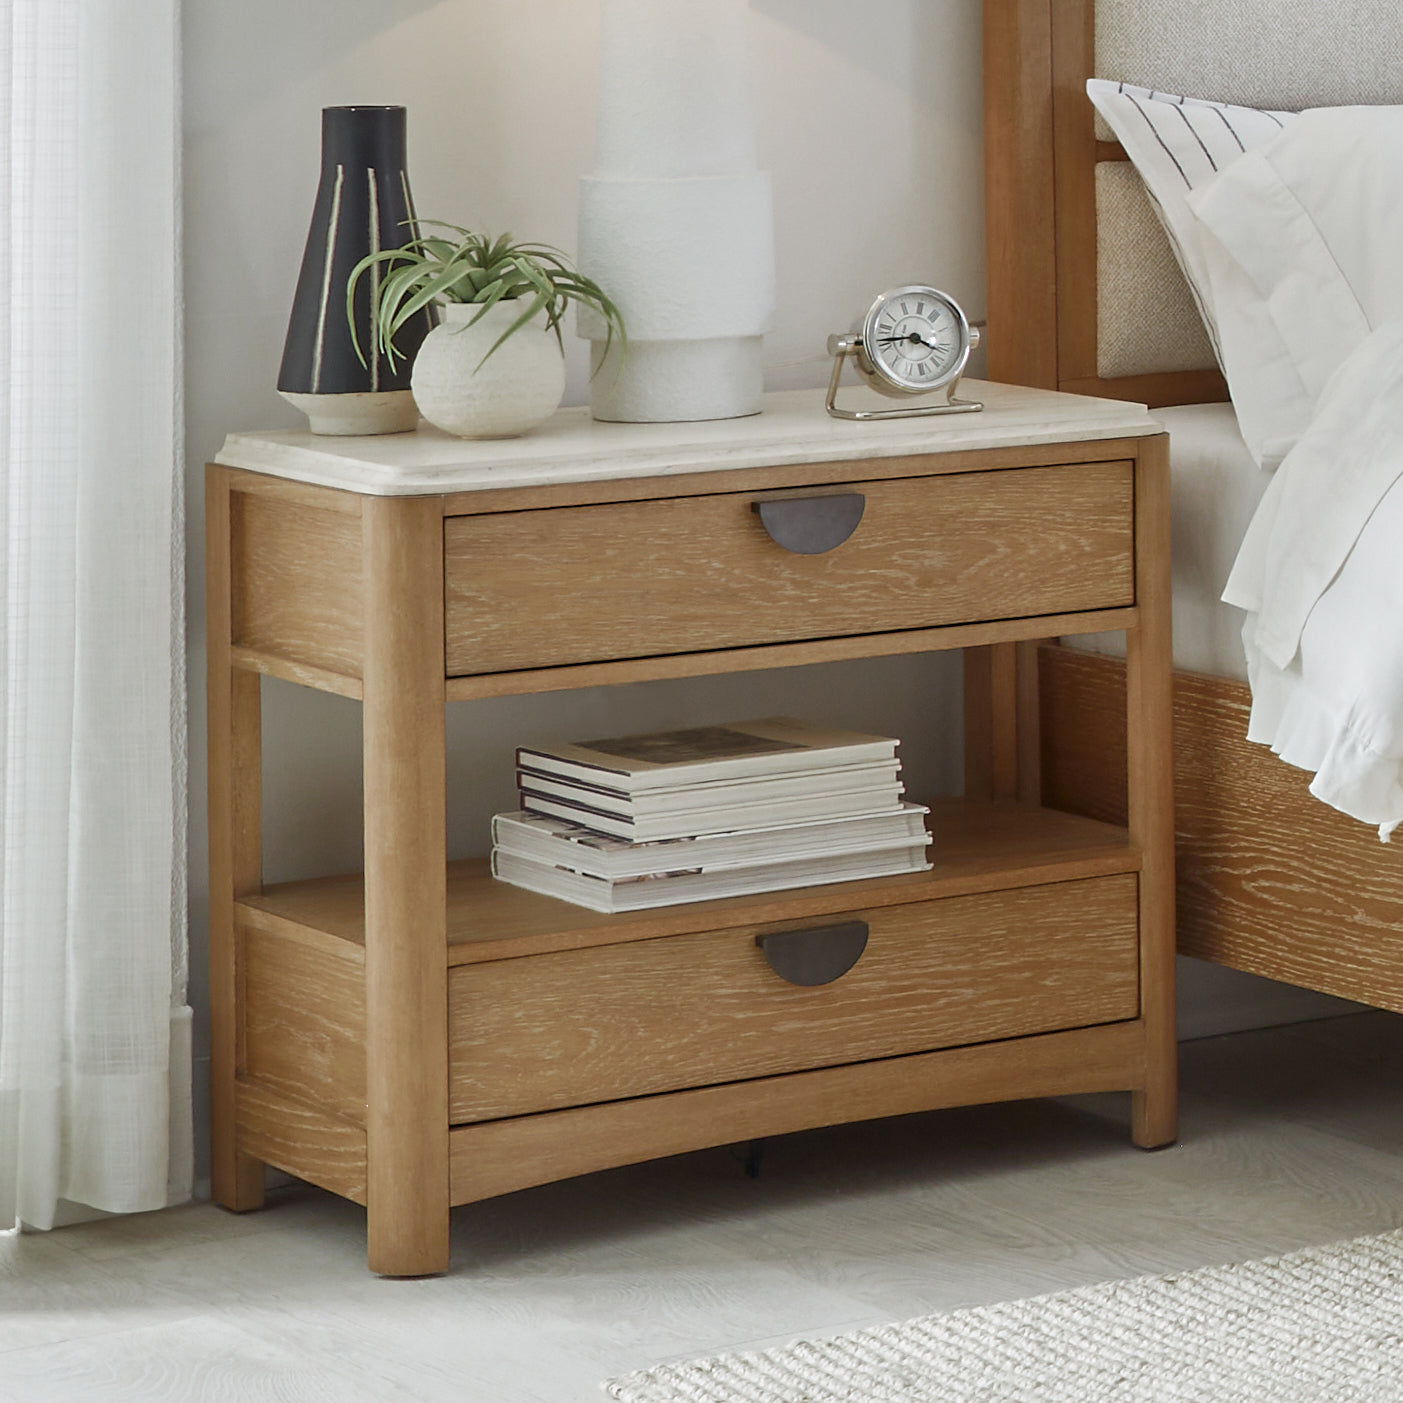 ESCAPE TWO-DRAWER NIGHTSTAND WITH STONE TOP